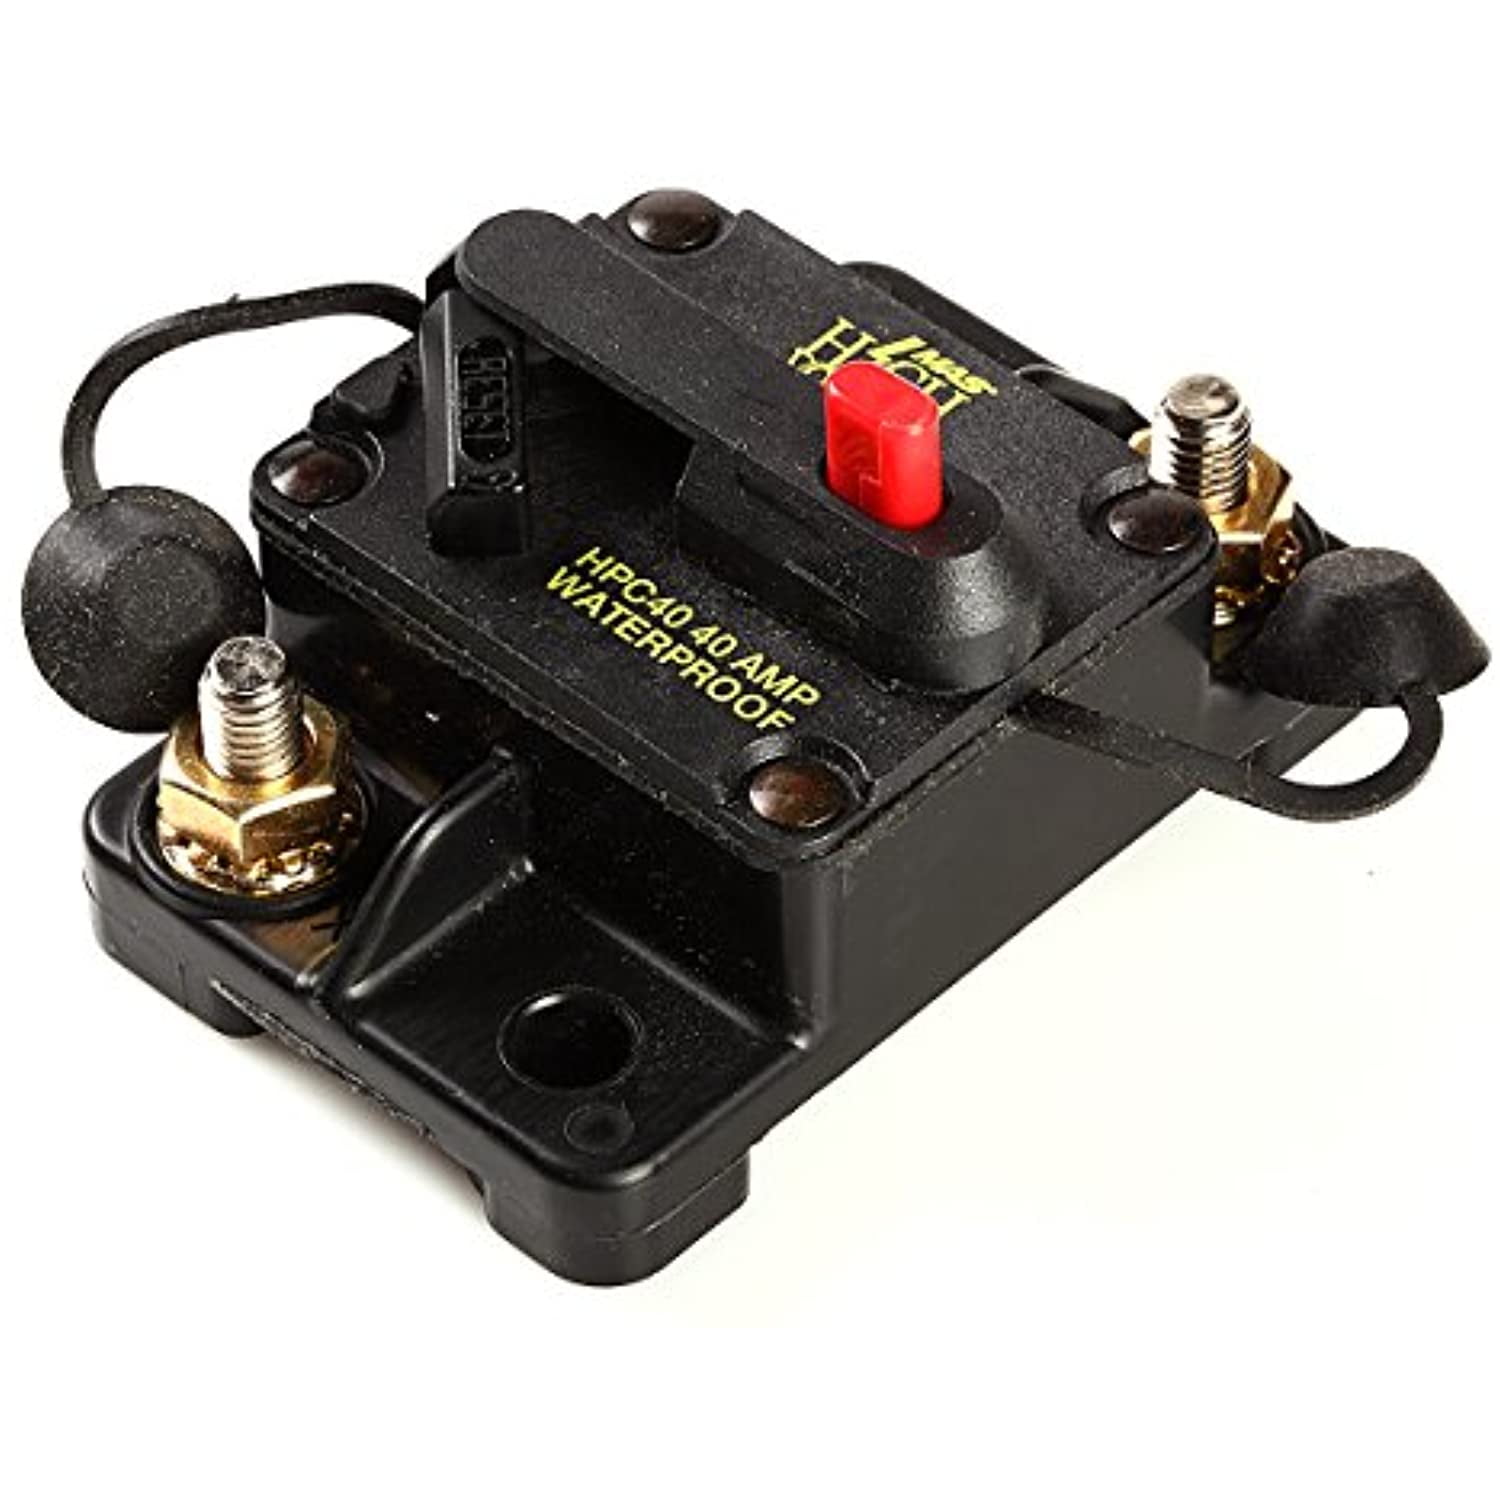 40A AMP Manual Reset Circuit Breaker 12v Car Boat Power Safety Protection 